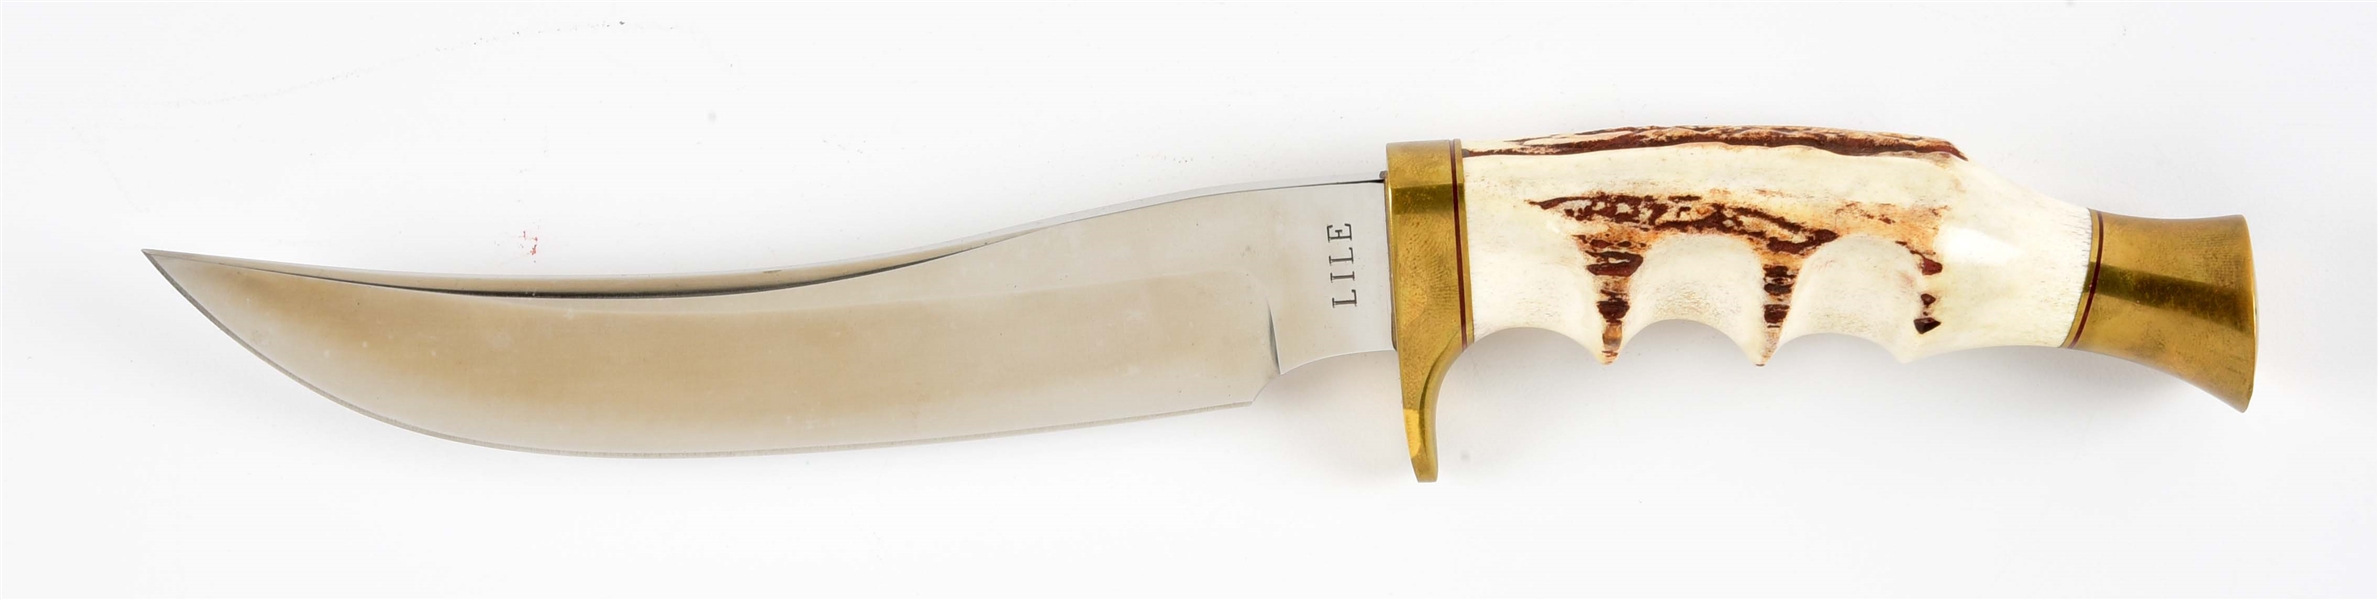 JIMMY LILE STAG KNIFE 